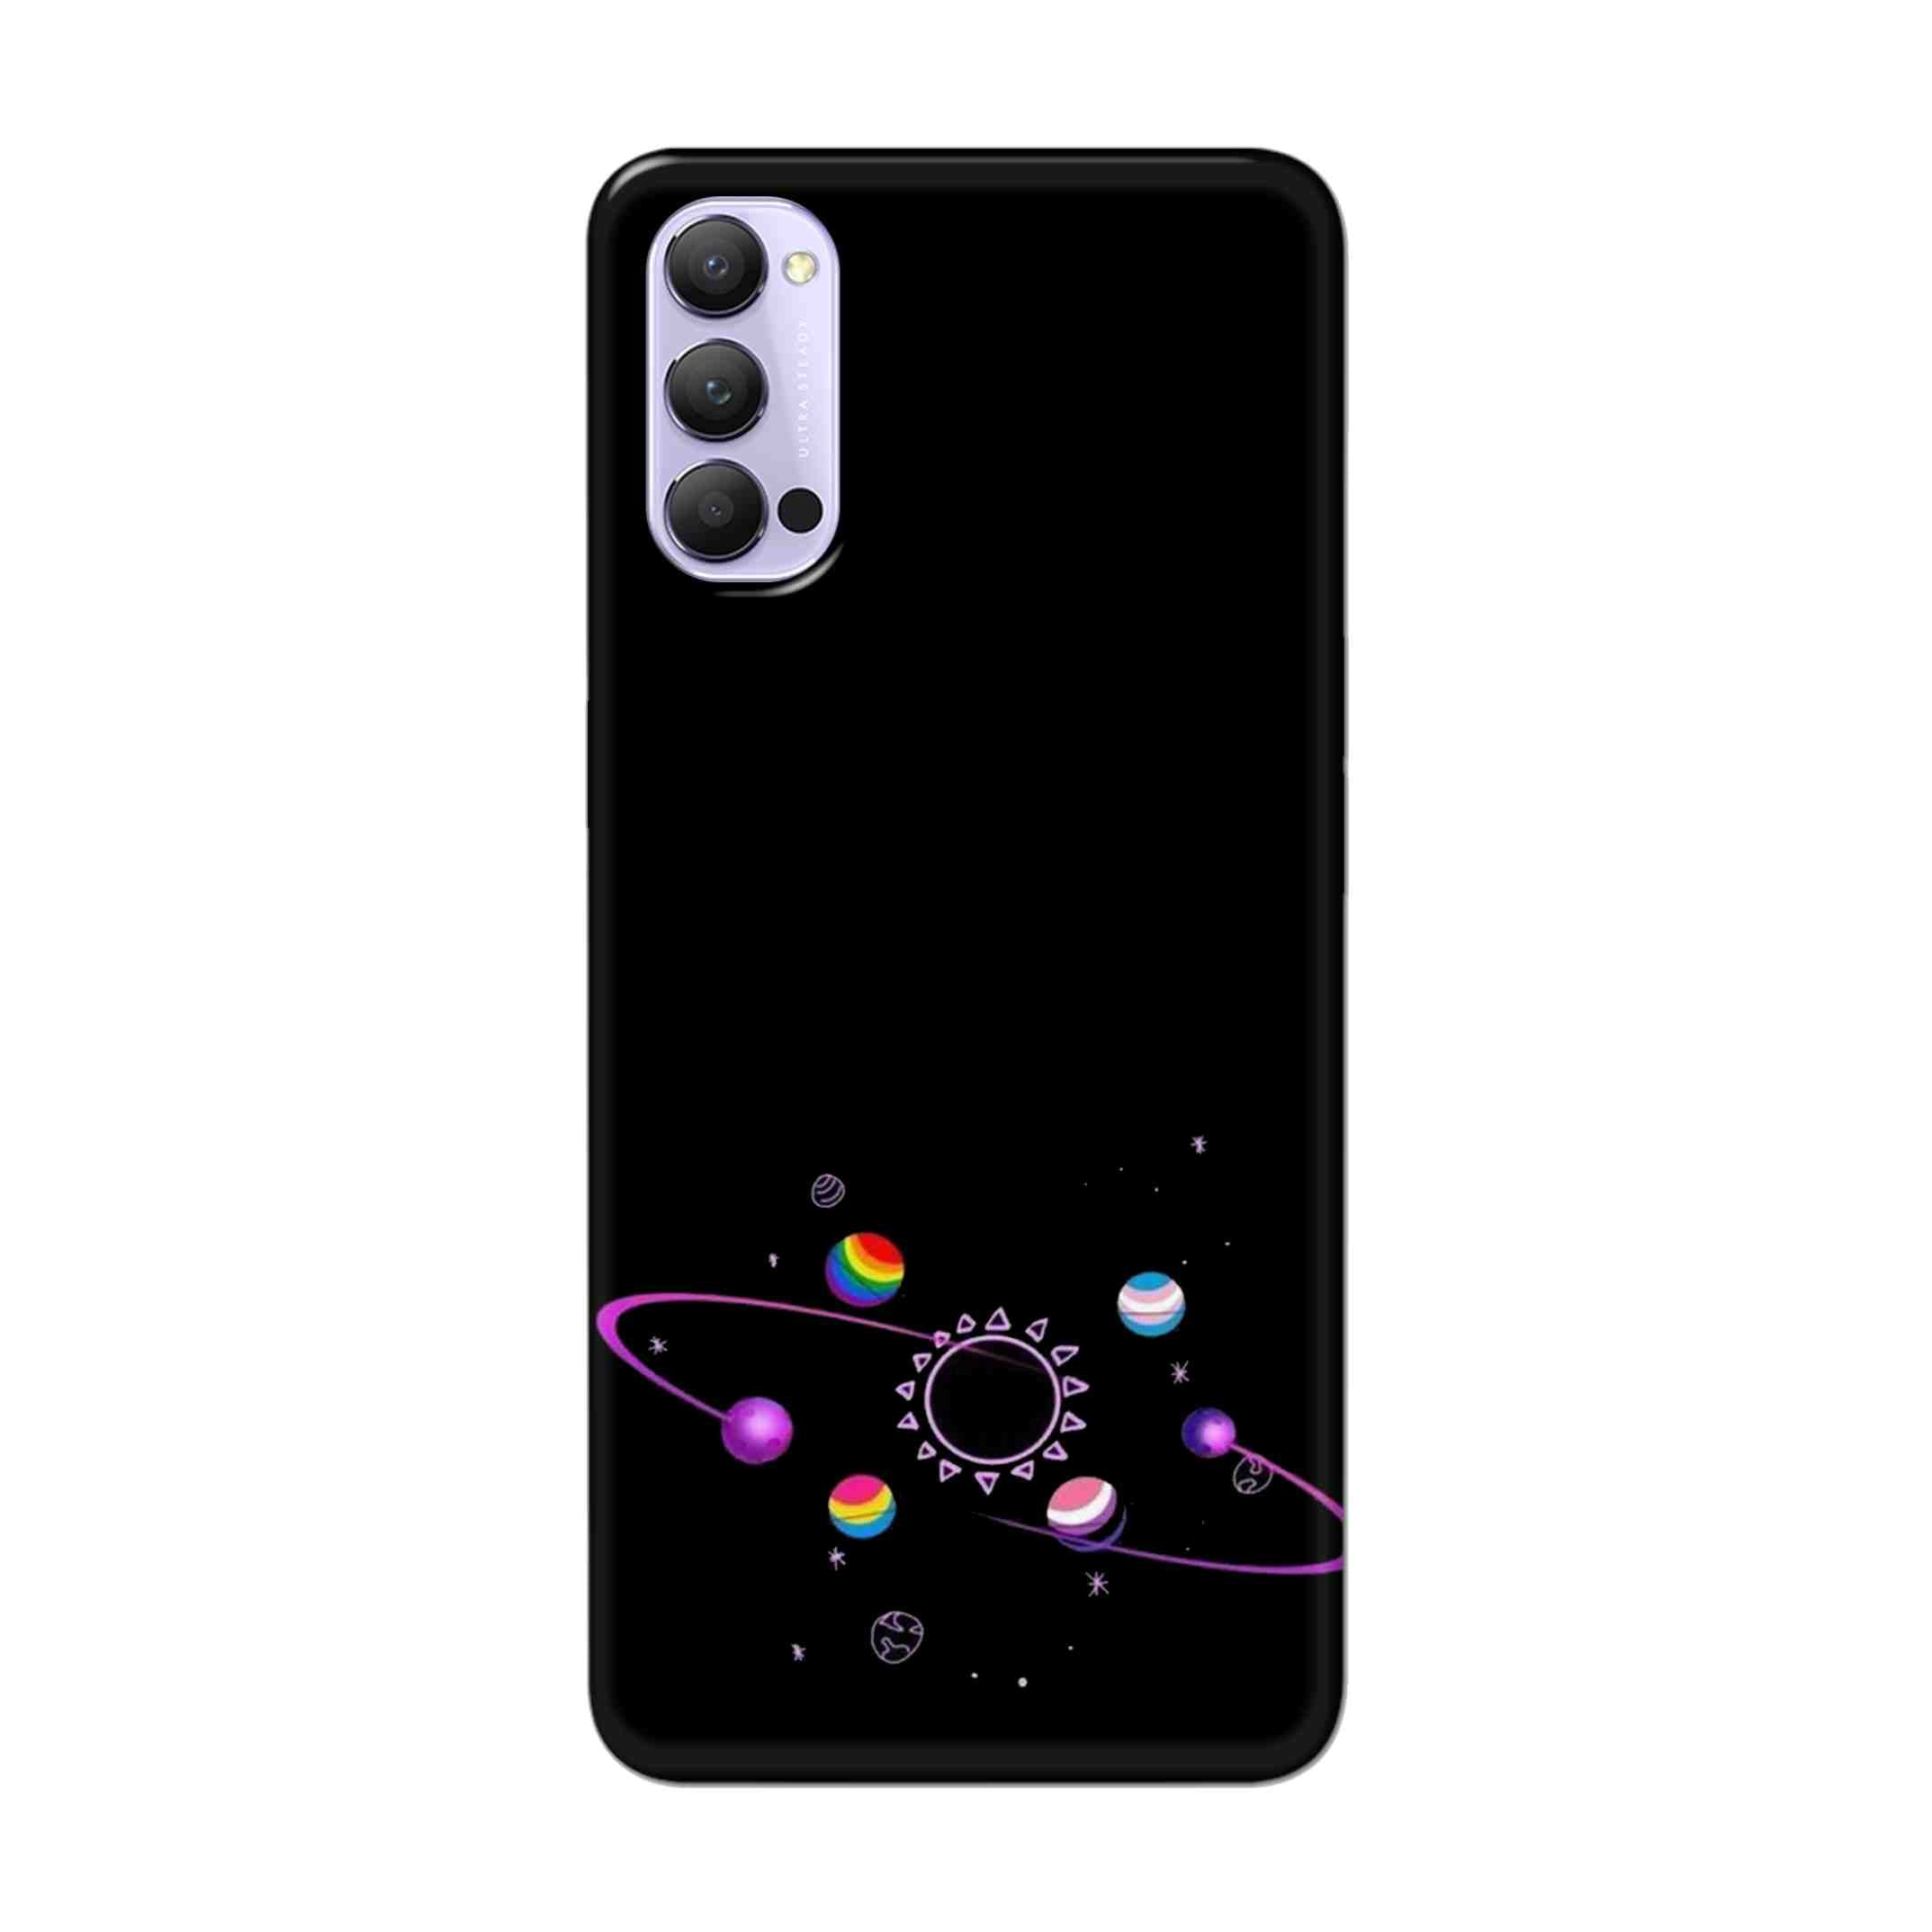 Buy Galaxy Hard Back Mobile Phone Case Cover For Oppo Reno 4 Pro Online